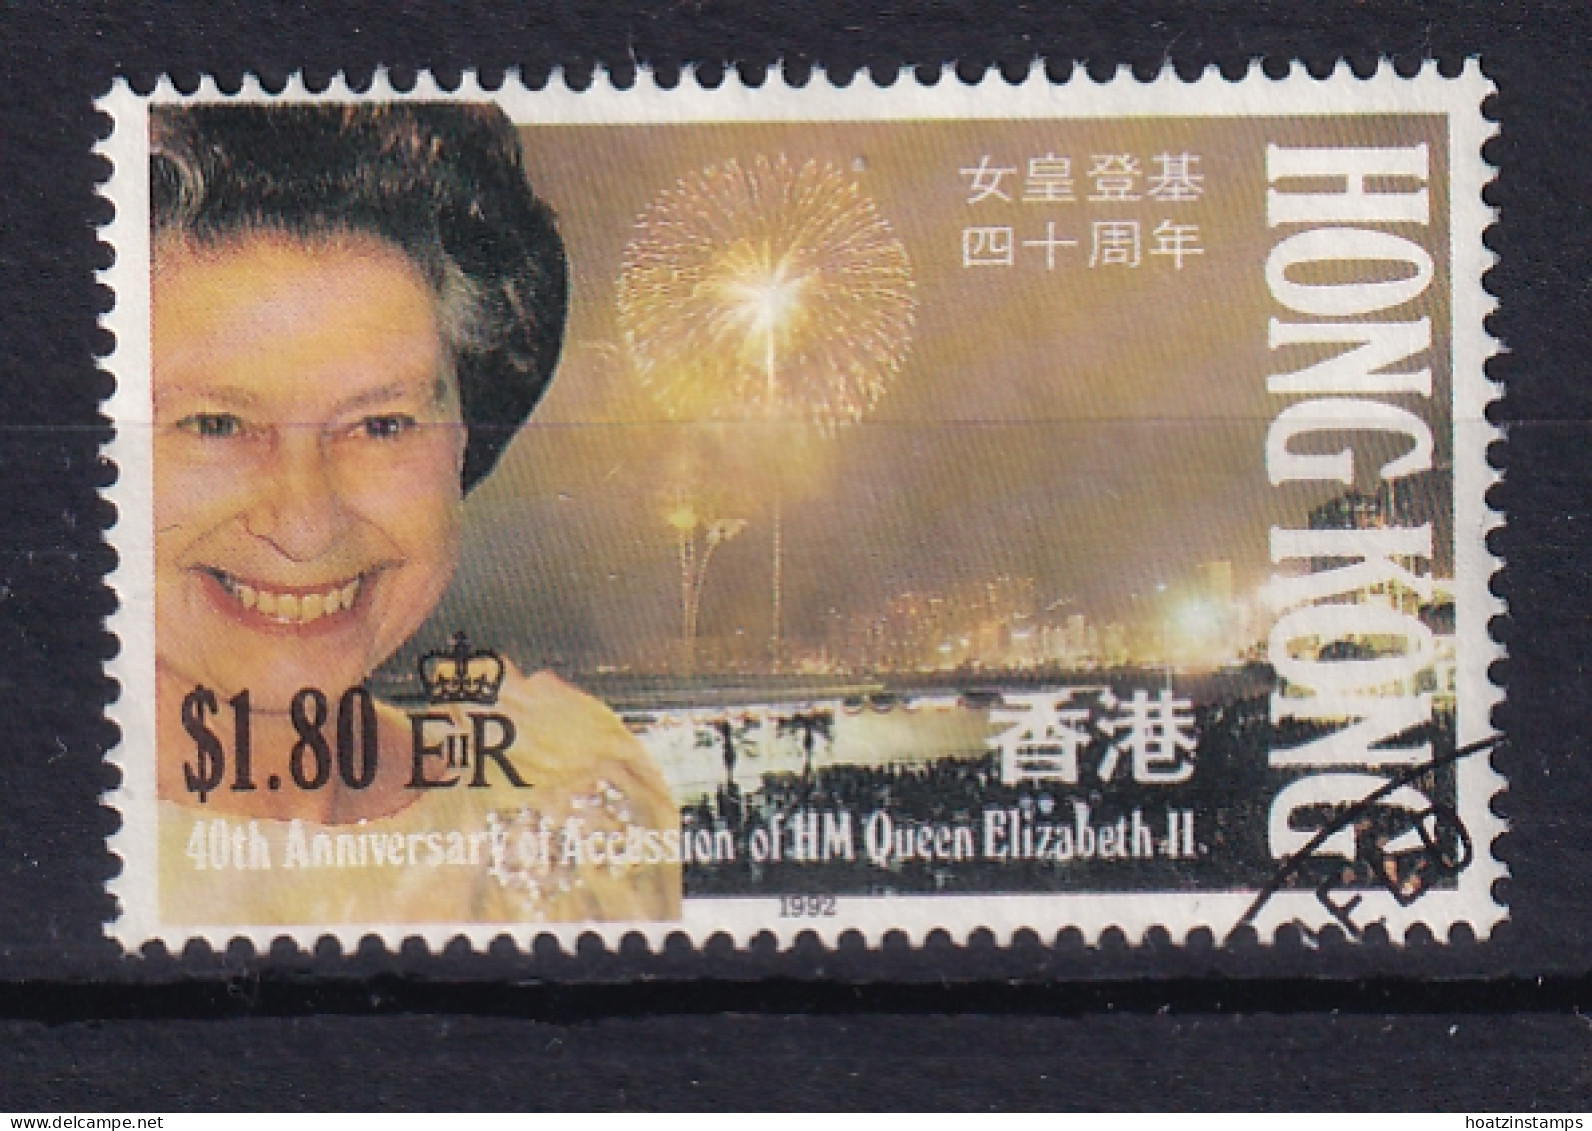 Hong Kong: 1992   40th Anniv Of QE II Accession   SG693    $1.80   Used  - Used Stamps